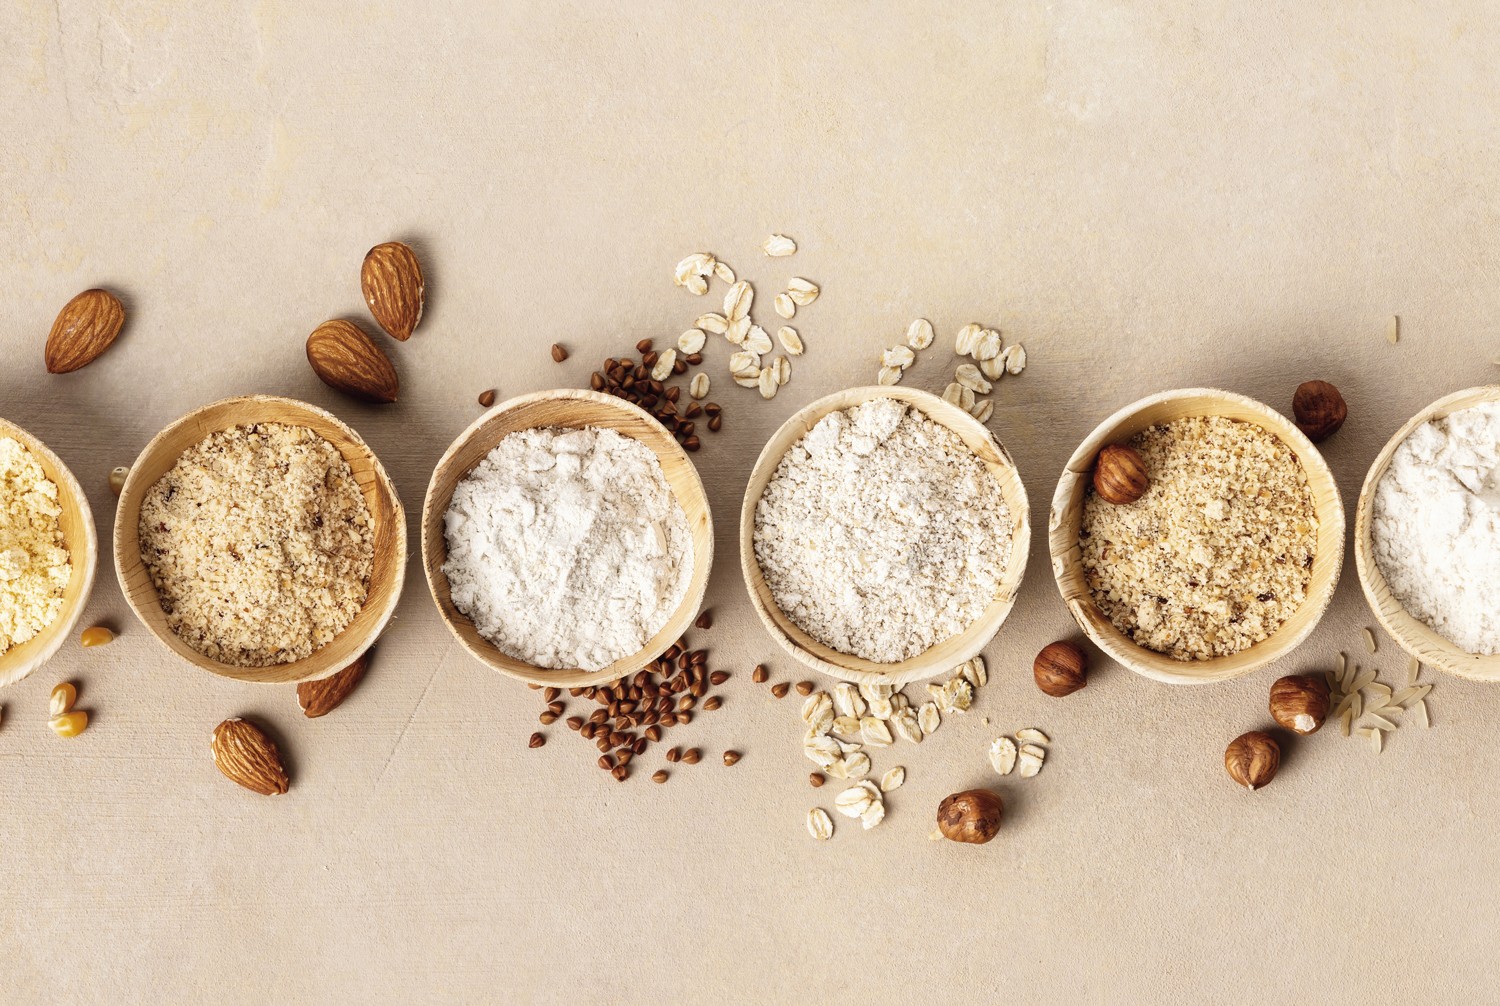 Getting ready to bake? Consider using a variety of flours to add taste and nutrition